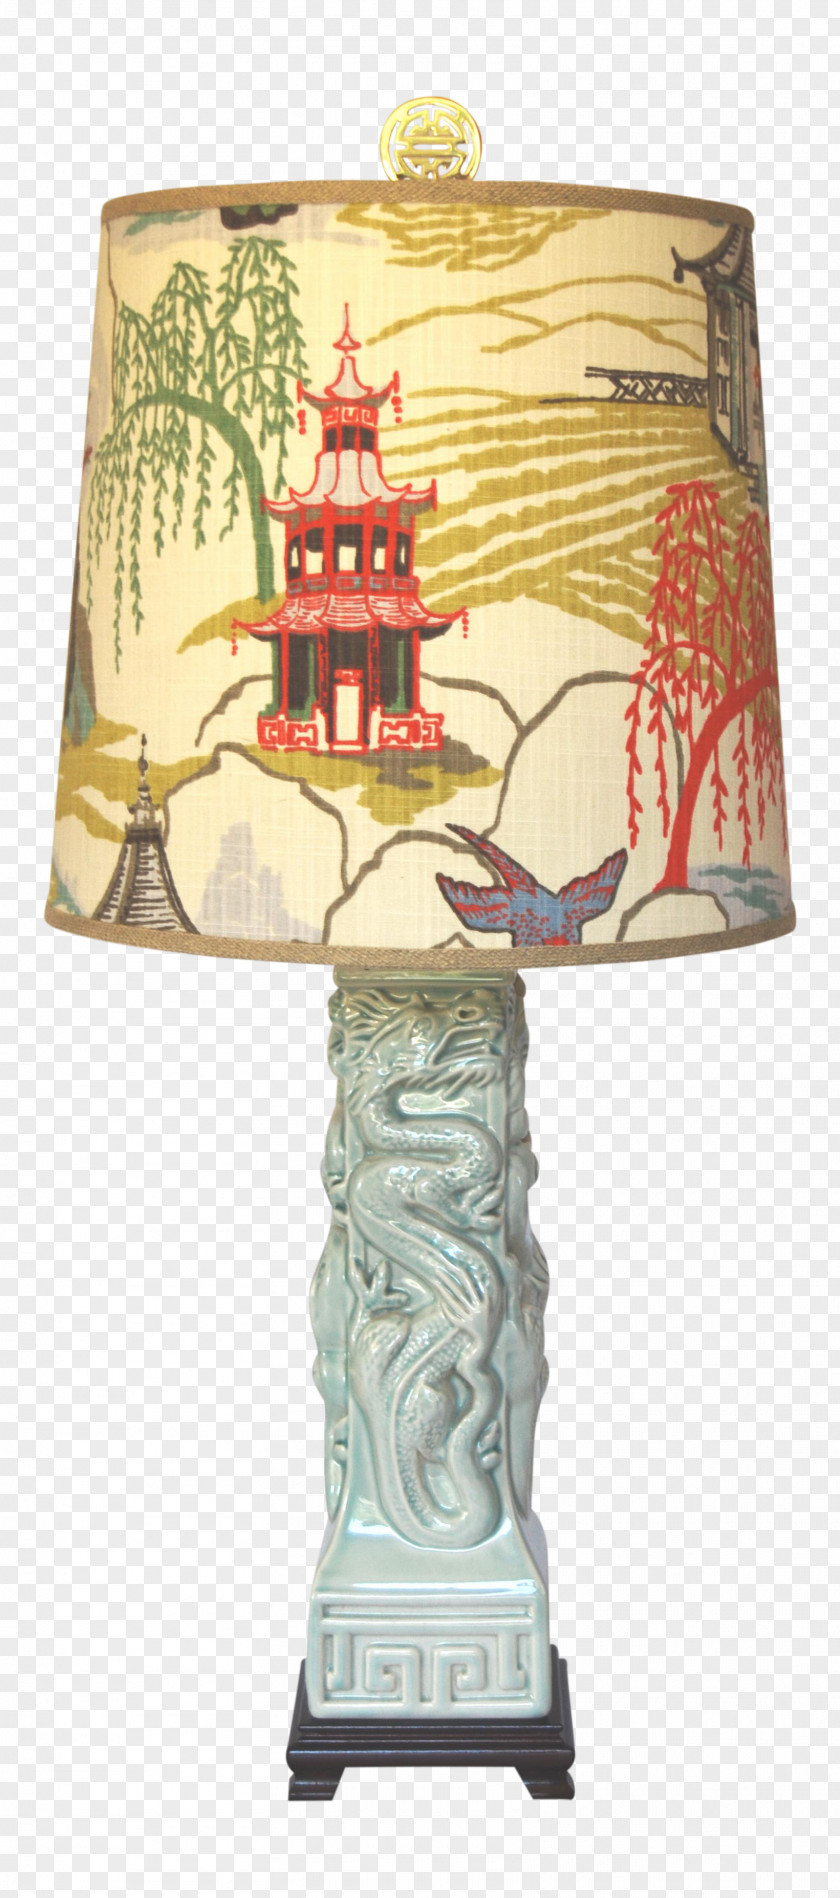 Celadon Lamp Shades Ceramic Chinoiserie PNG